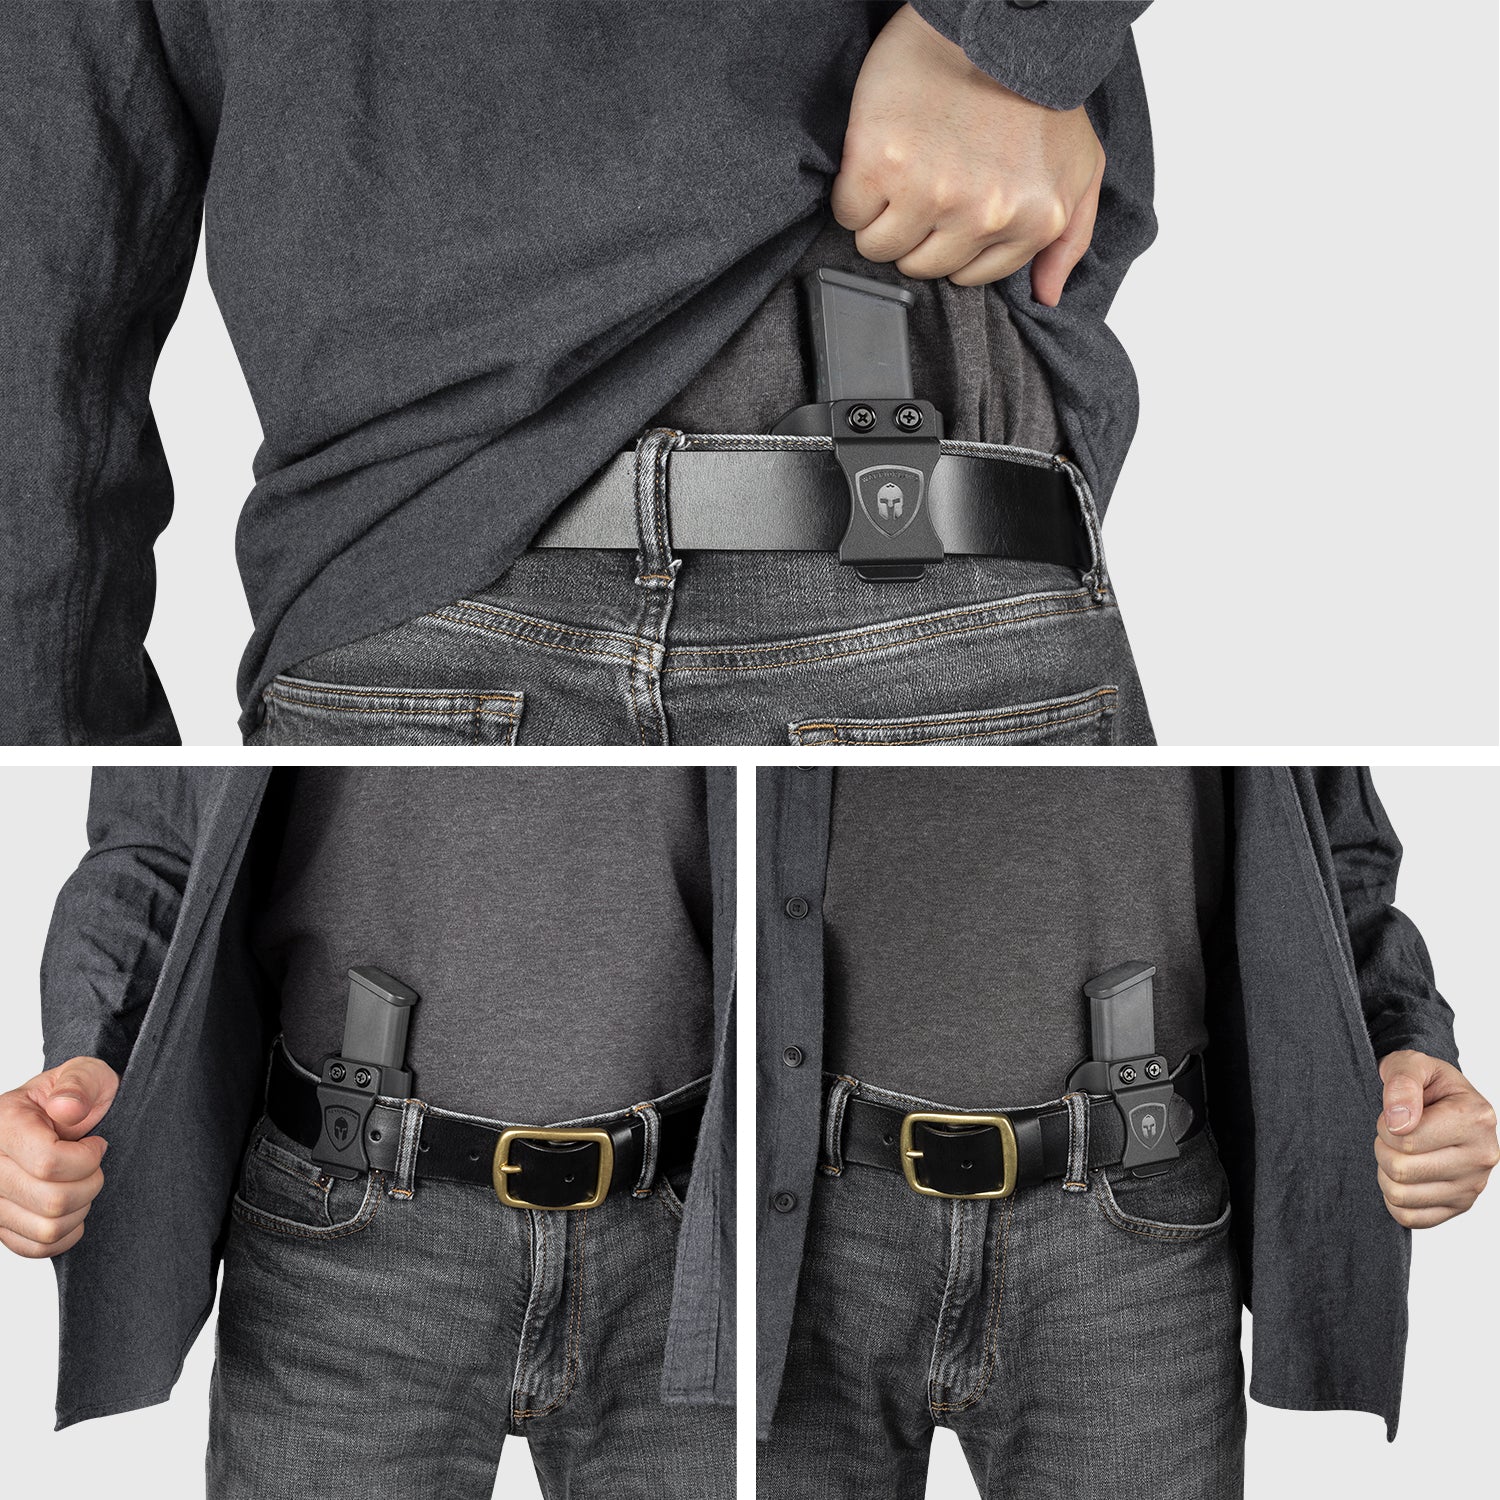 Kydex Double Mag Pouch Buy Cheapest | mindeduca.com.br